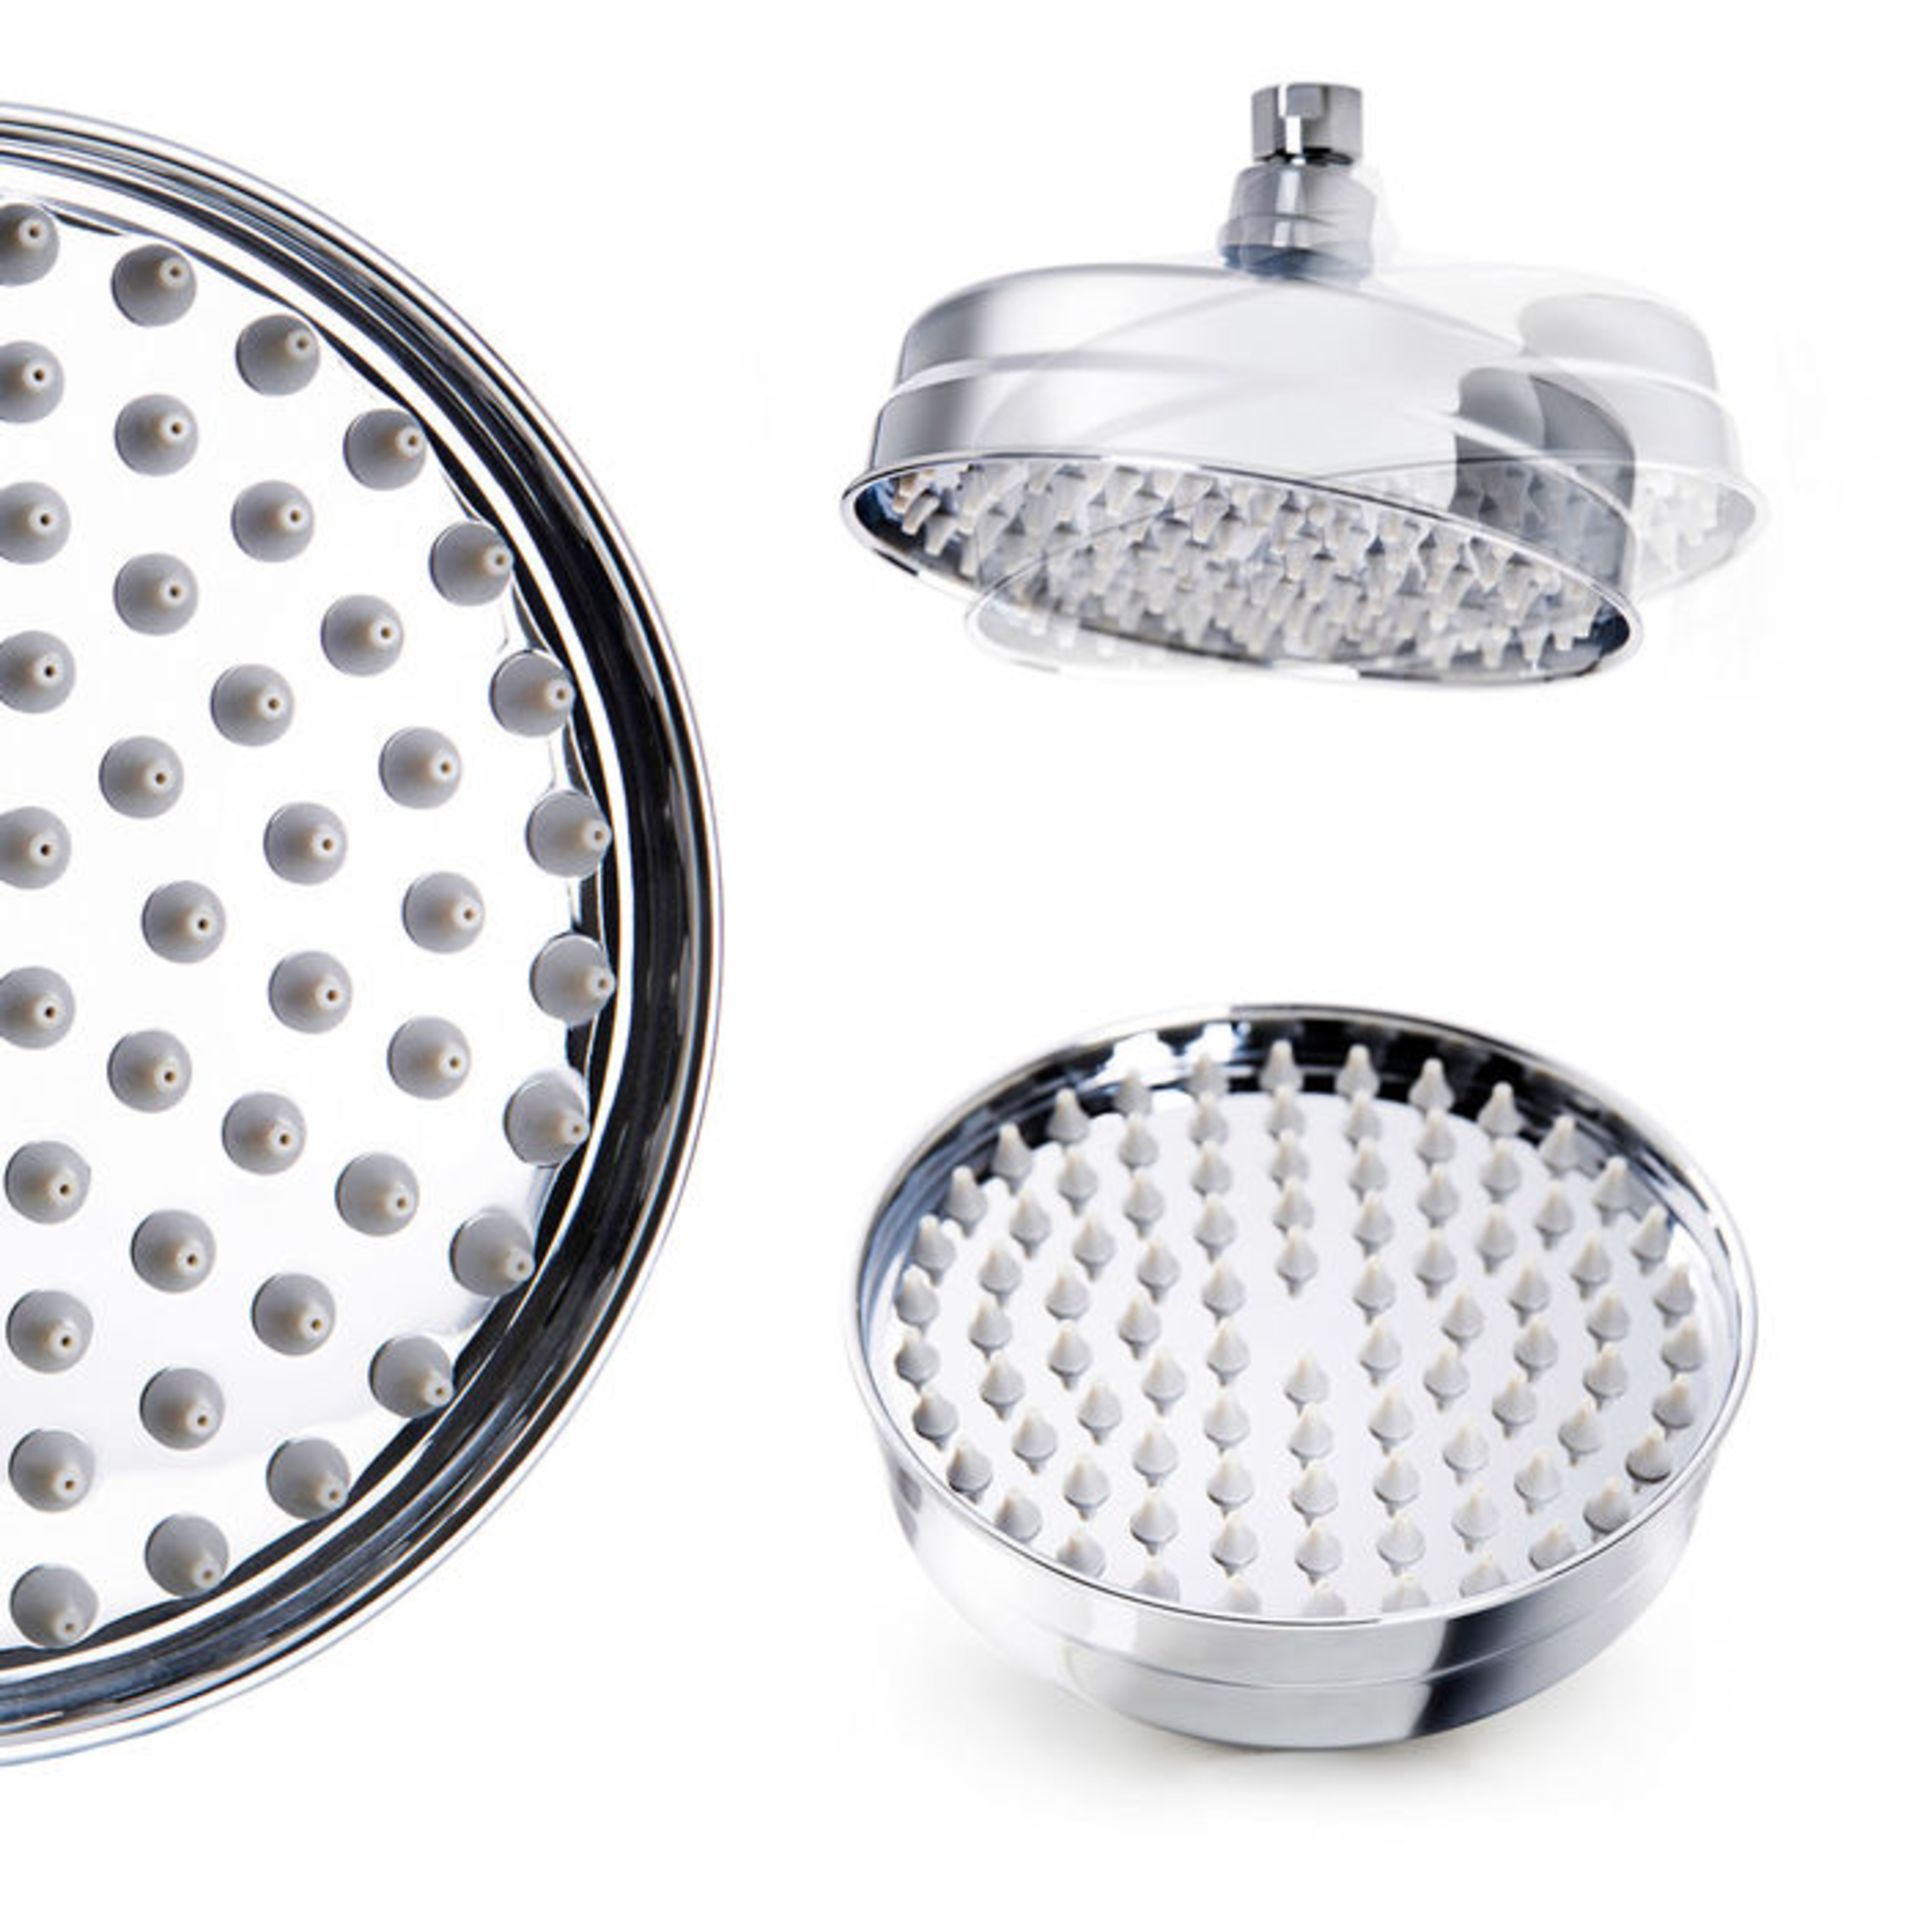 (M1086) Stainless Steel 150mm Traditional Round Shower Head Finished in high quality polished ... - Image 2 of 2